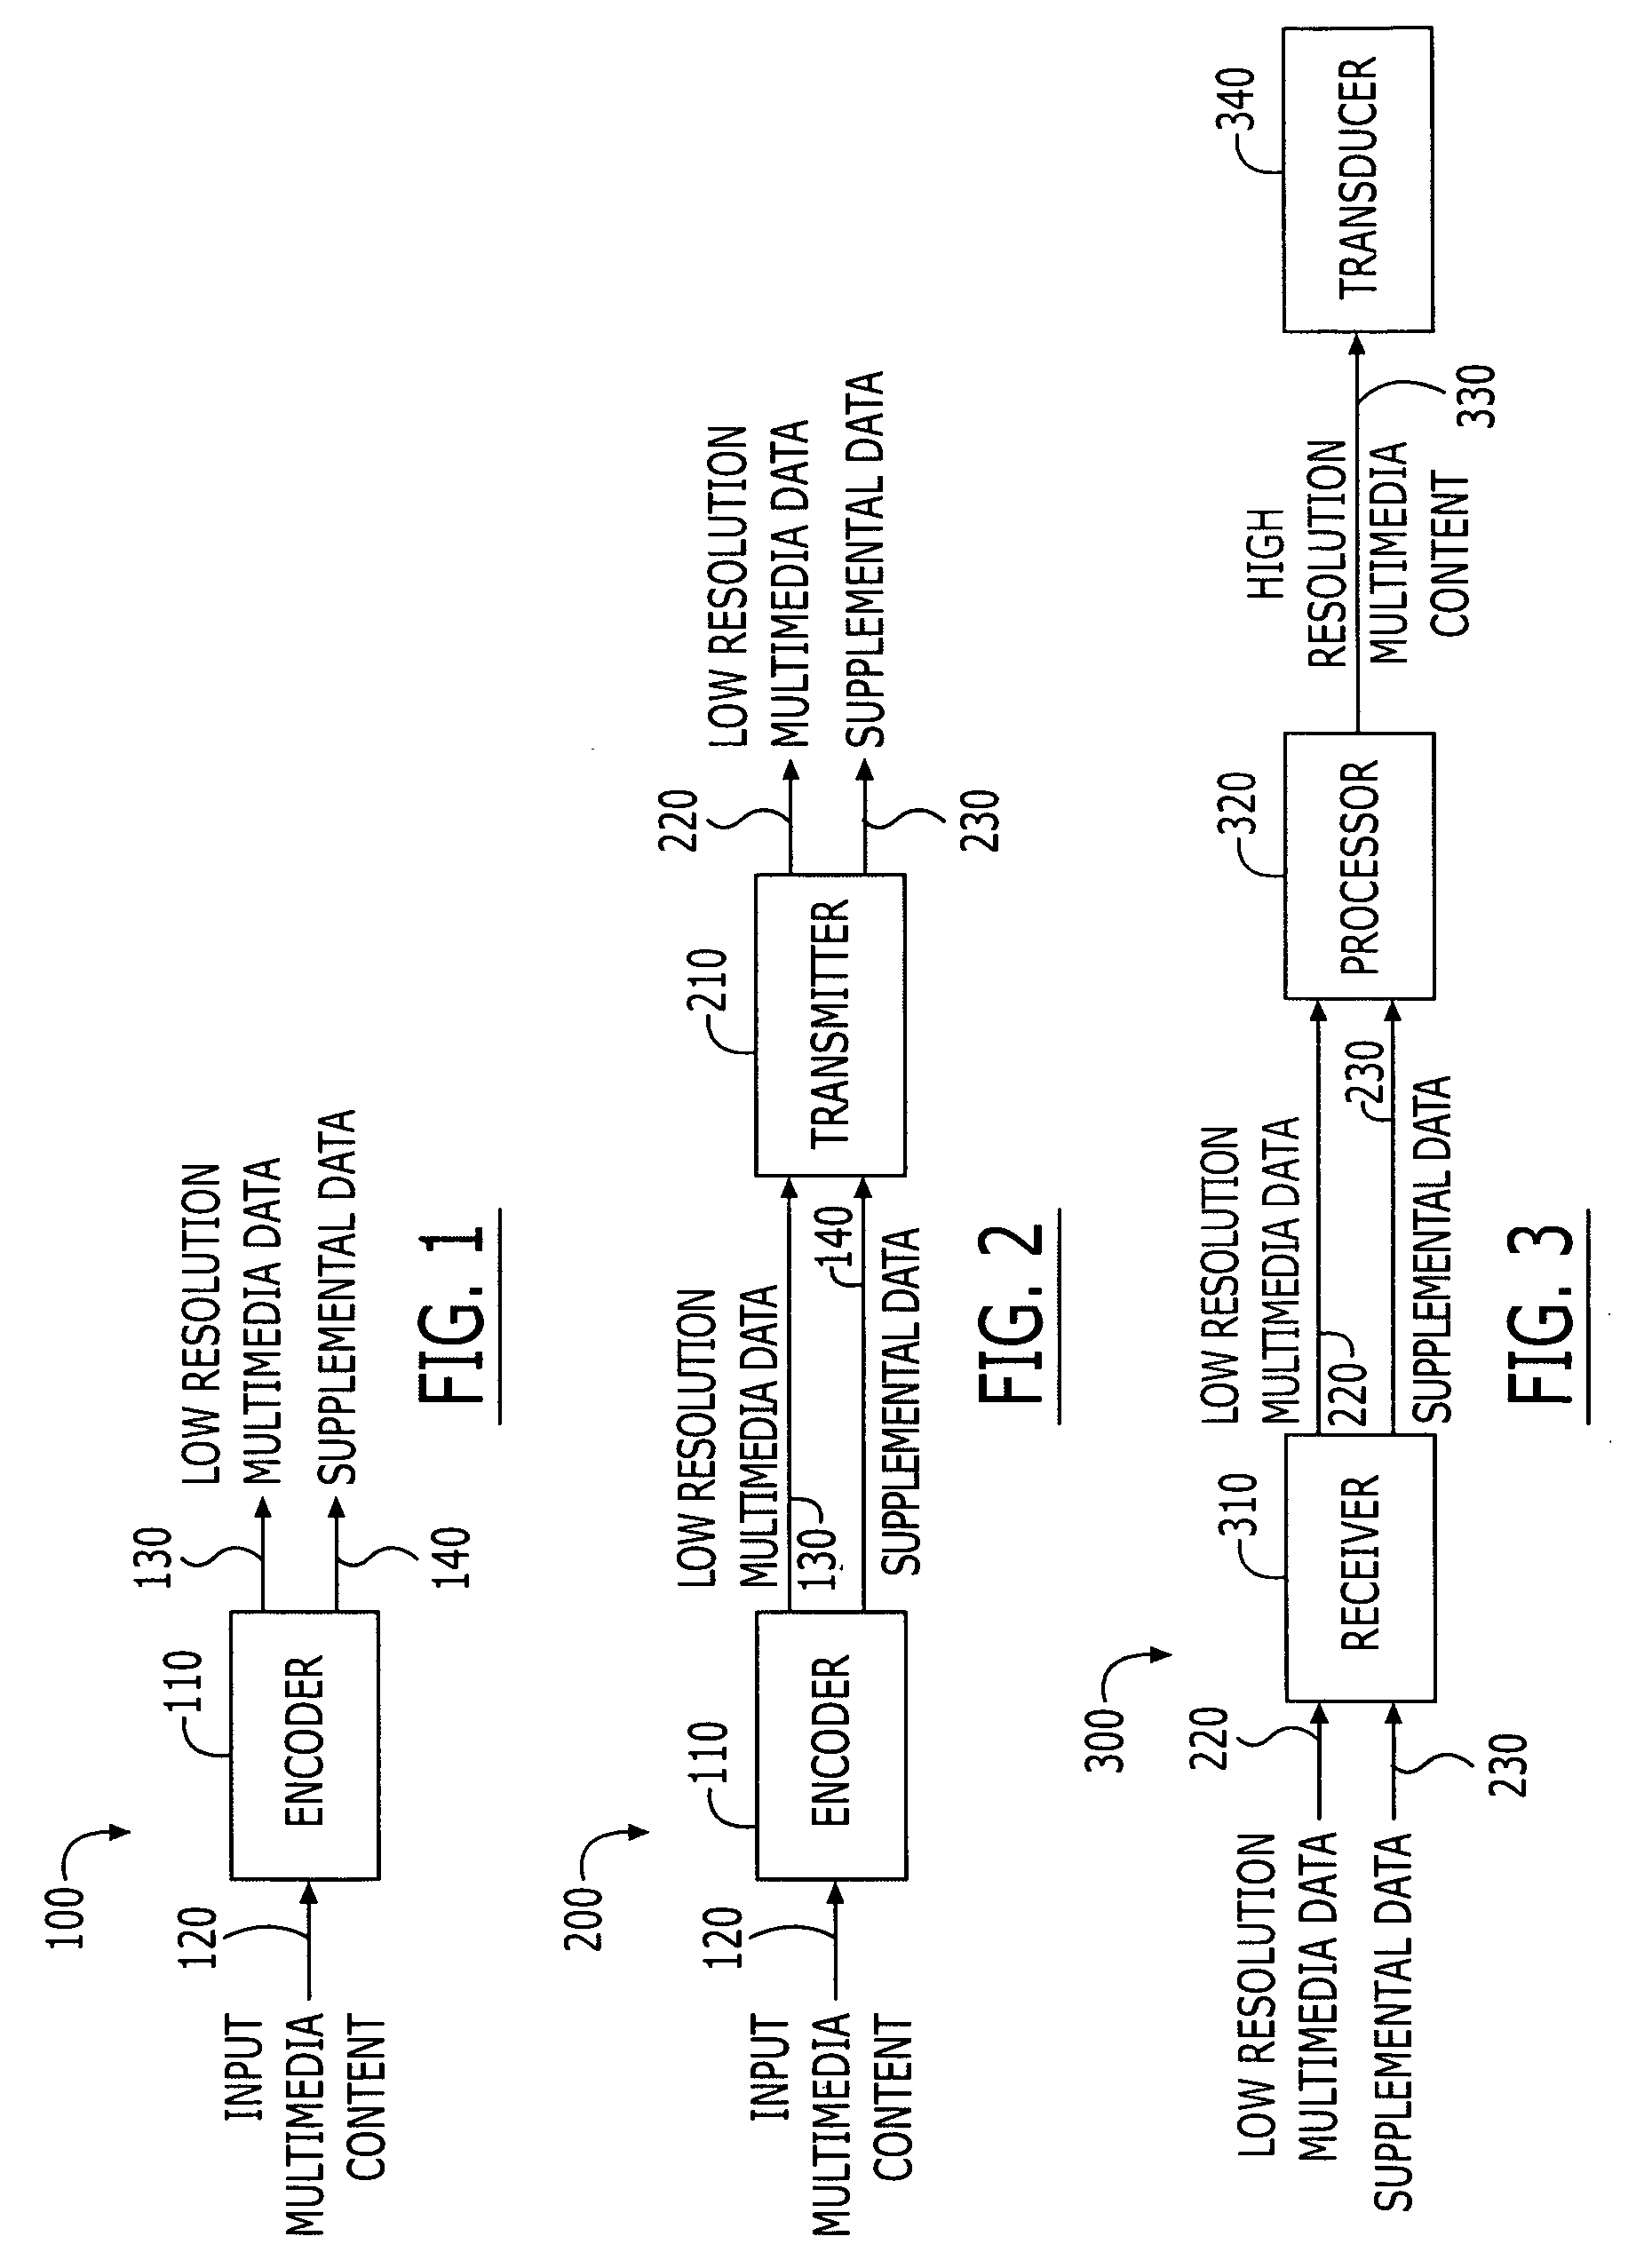 Multimedia distributing and/or playing systems and methods using separate resolution-enhancing supplemental data